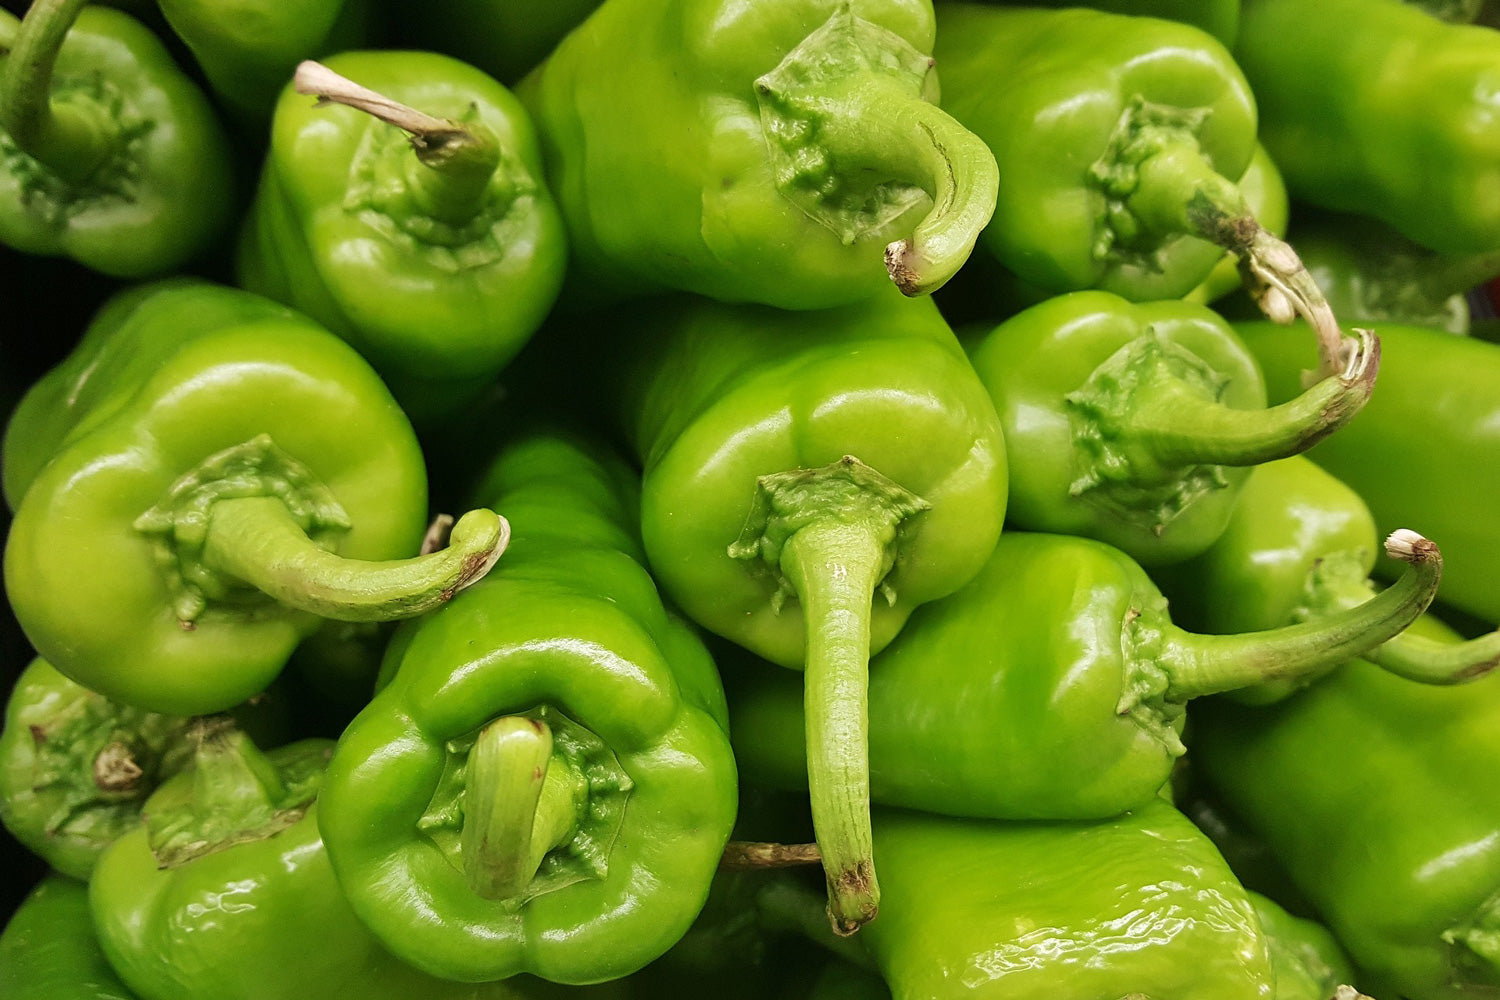 What Is an Anaheim Pepper and How How Are They?